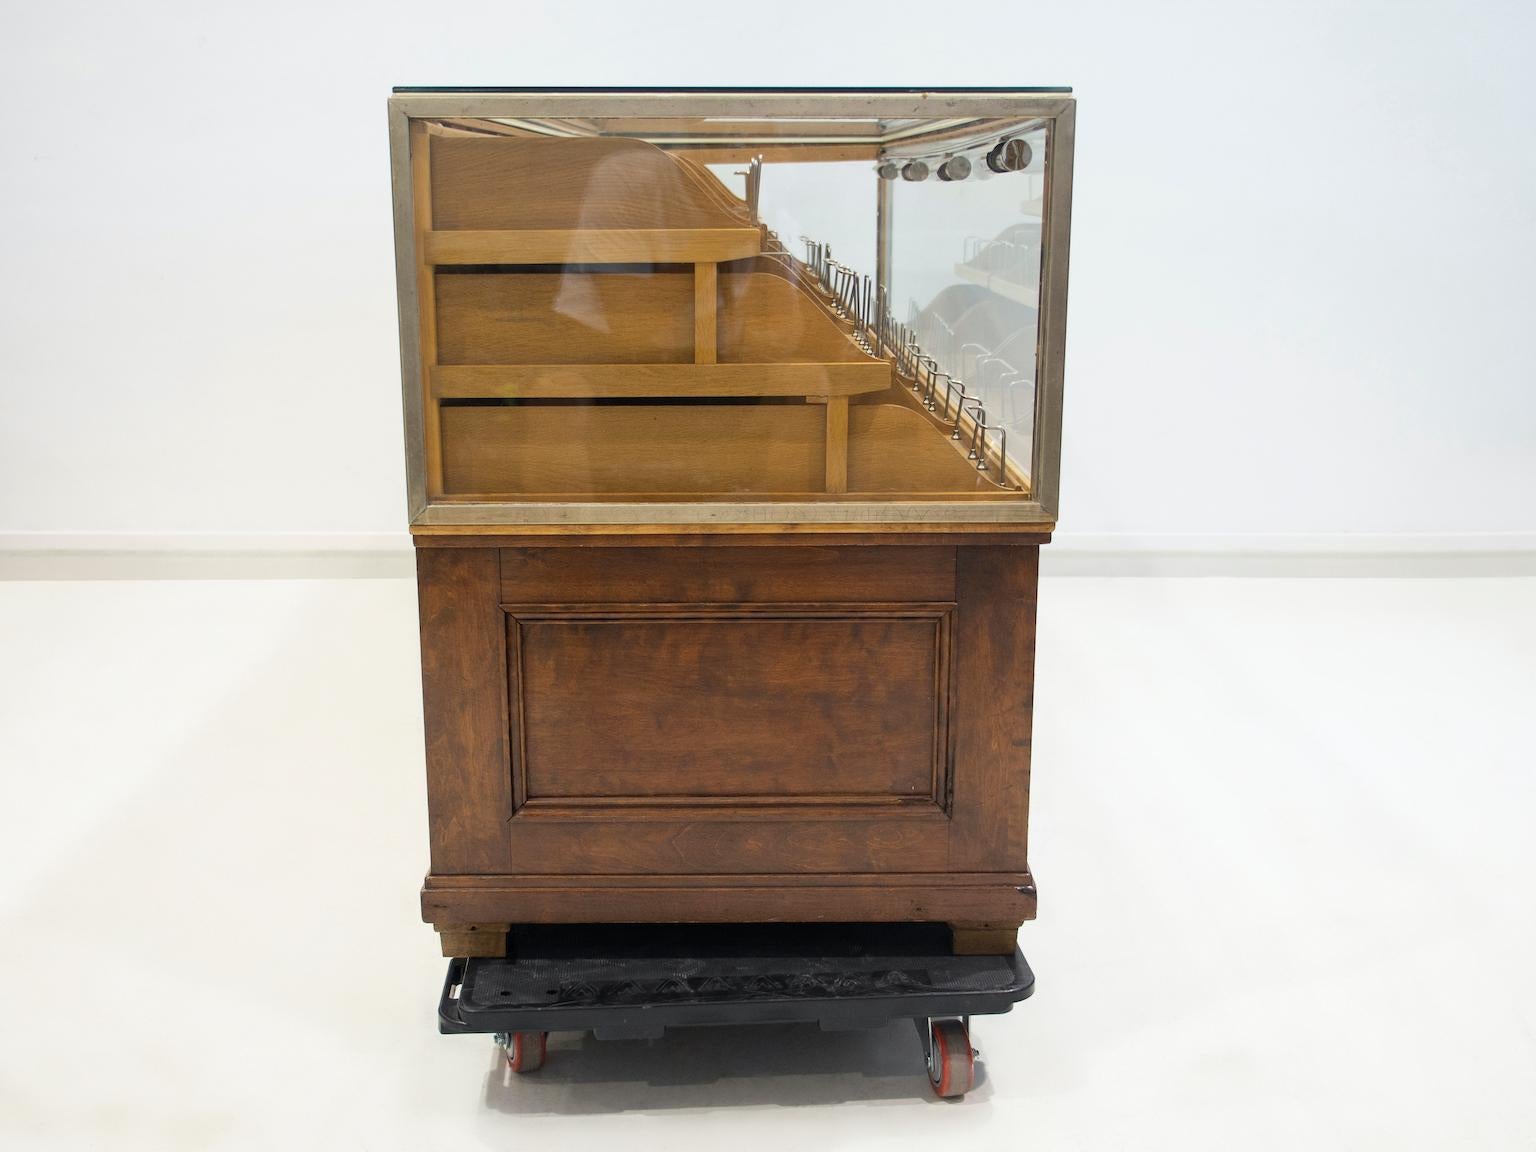 Shop Counter of Birch and Oak Wood with Twenty Drawers, 1940's For Sale 6